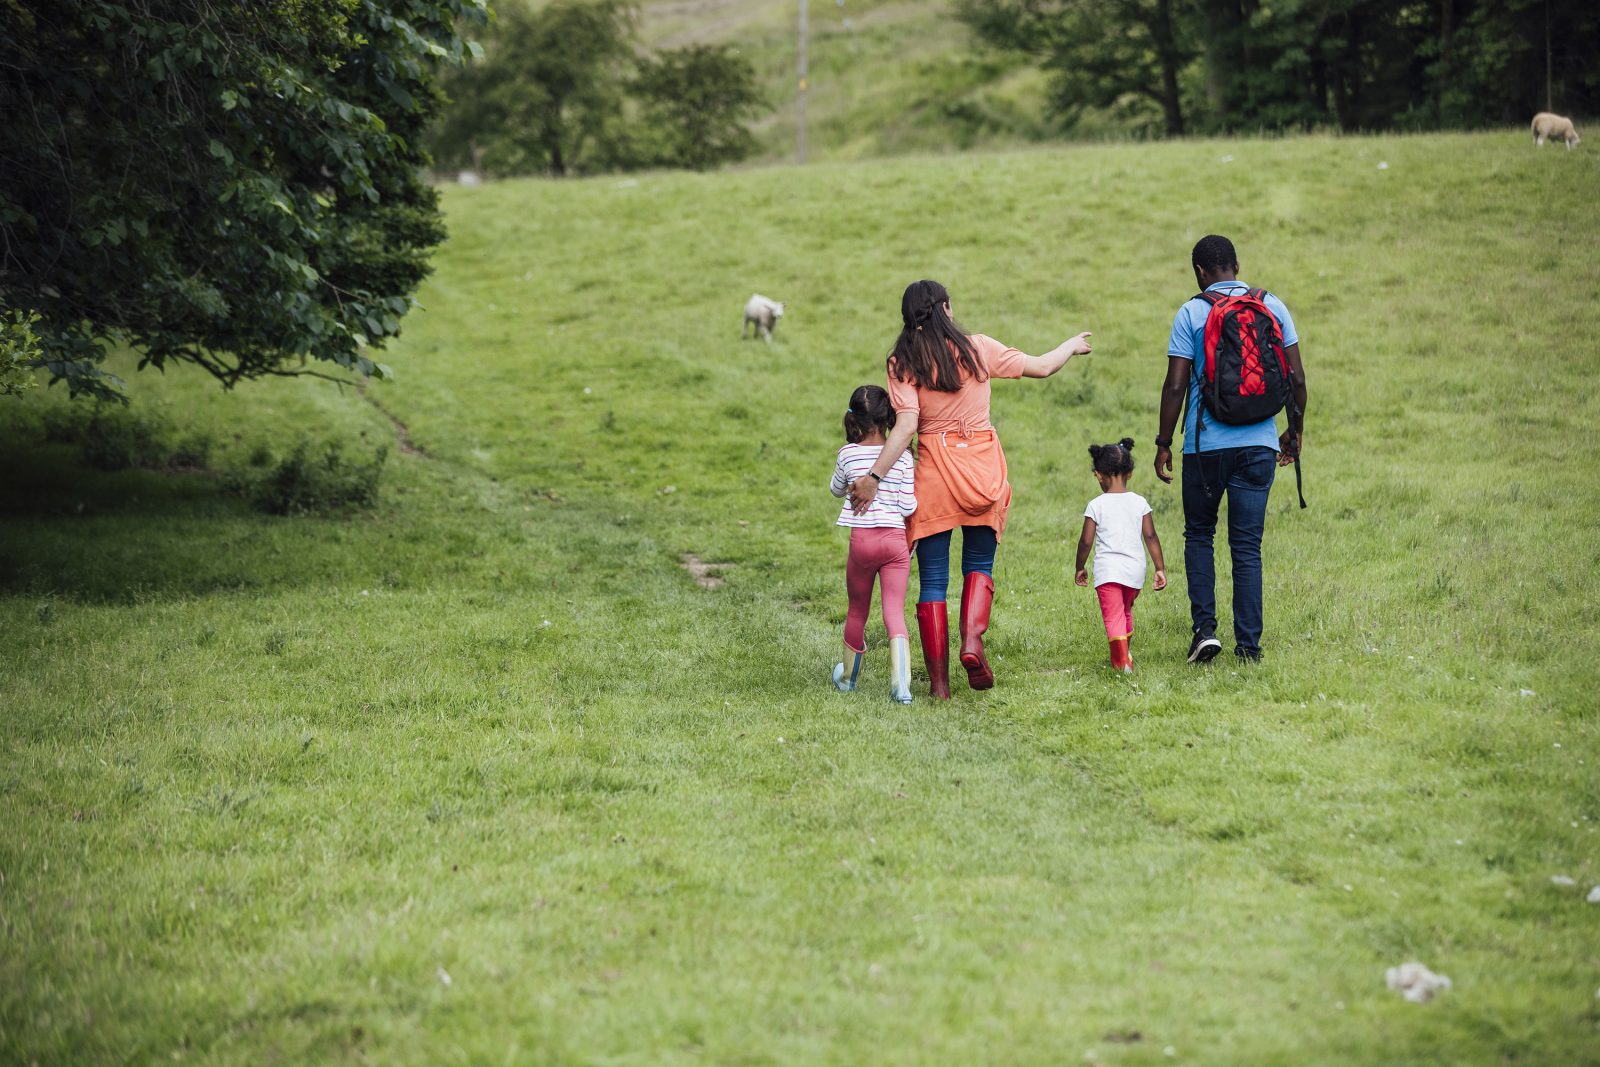 A rear view of a family, including two adults and two children, walking up a grassy hill.